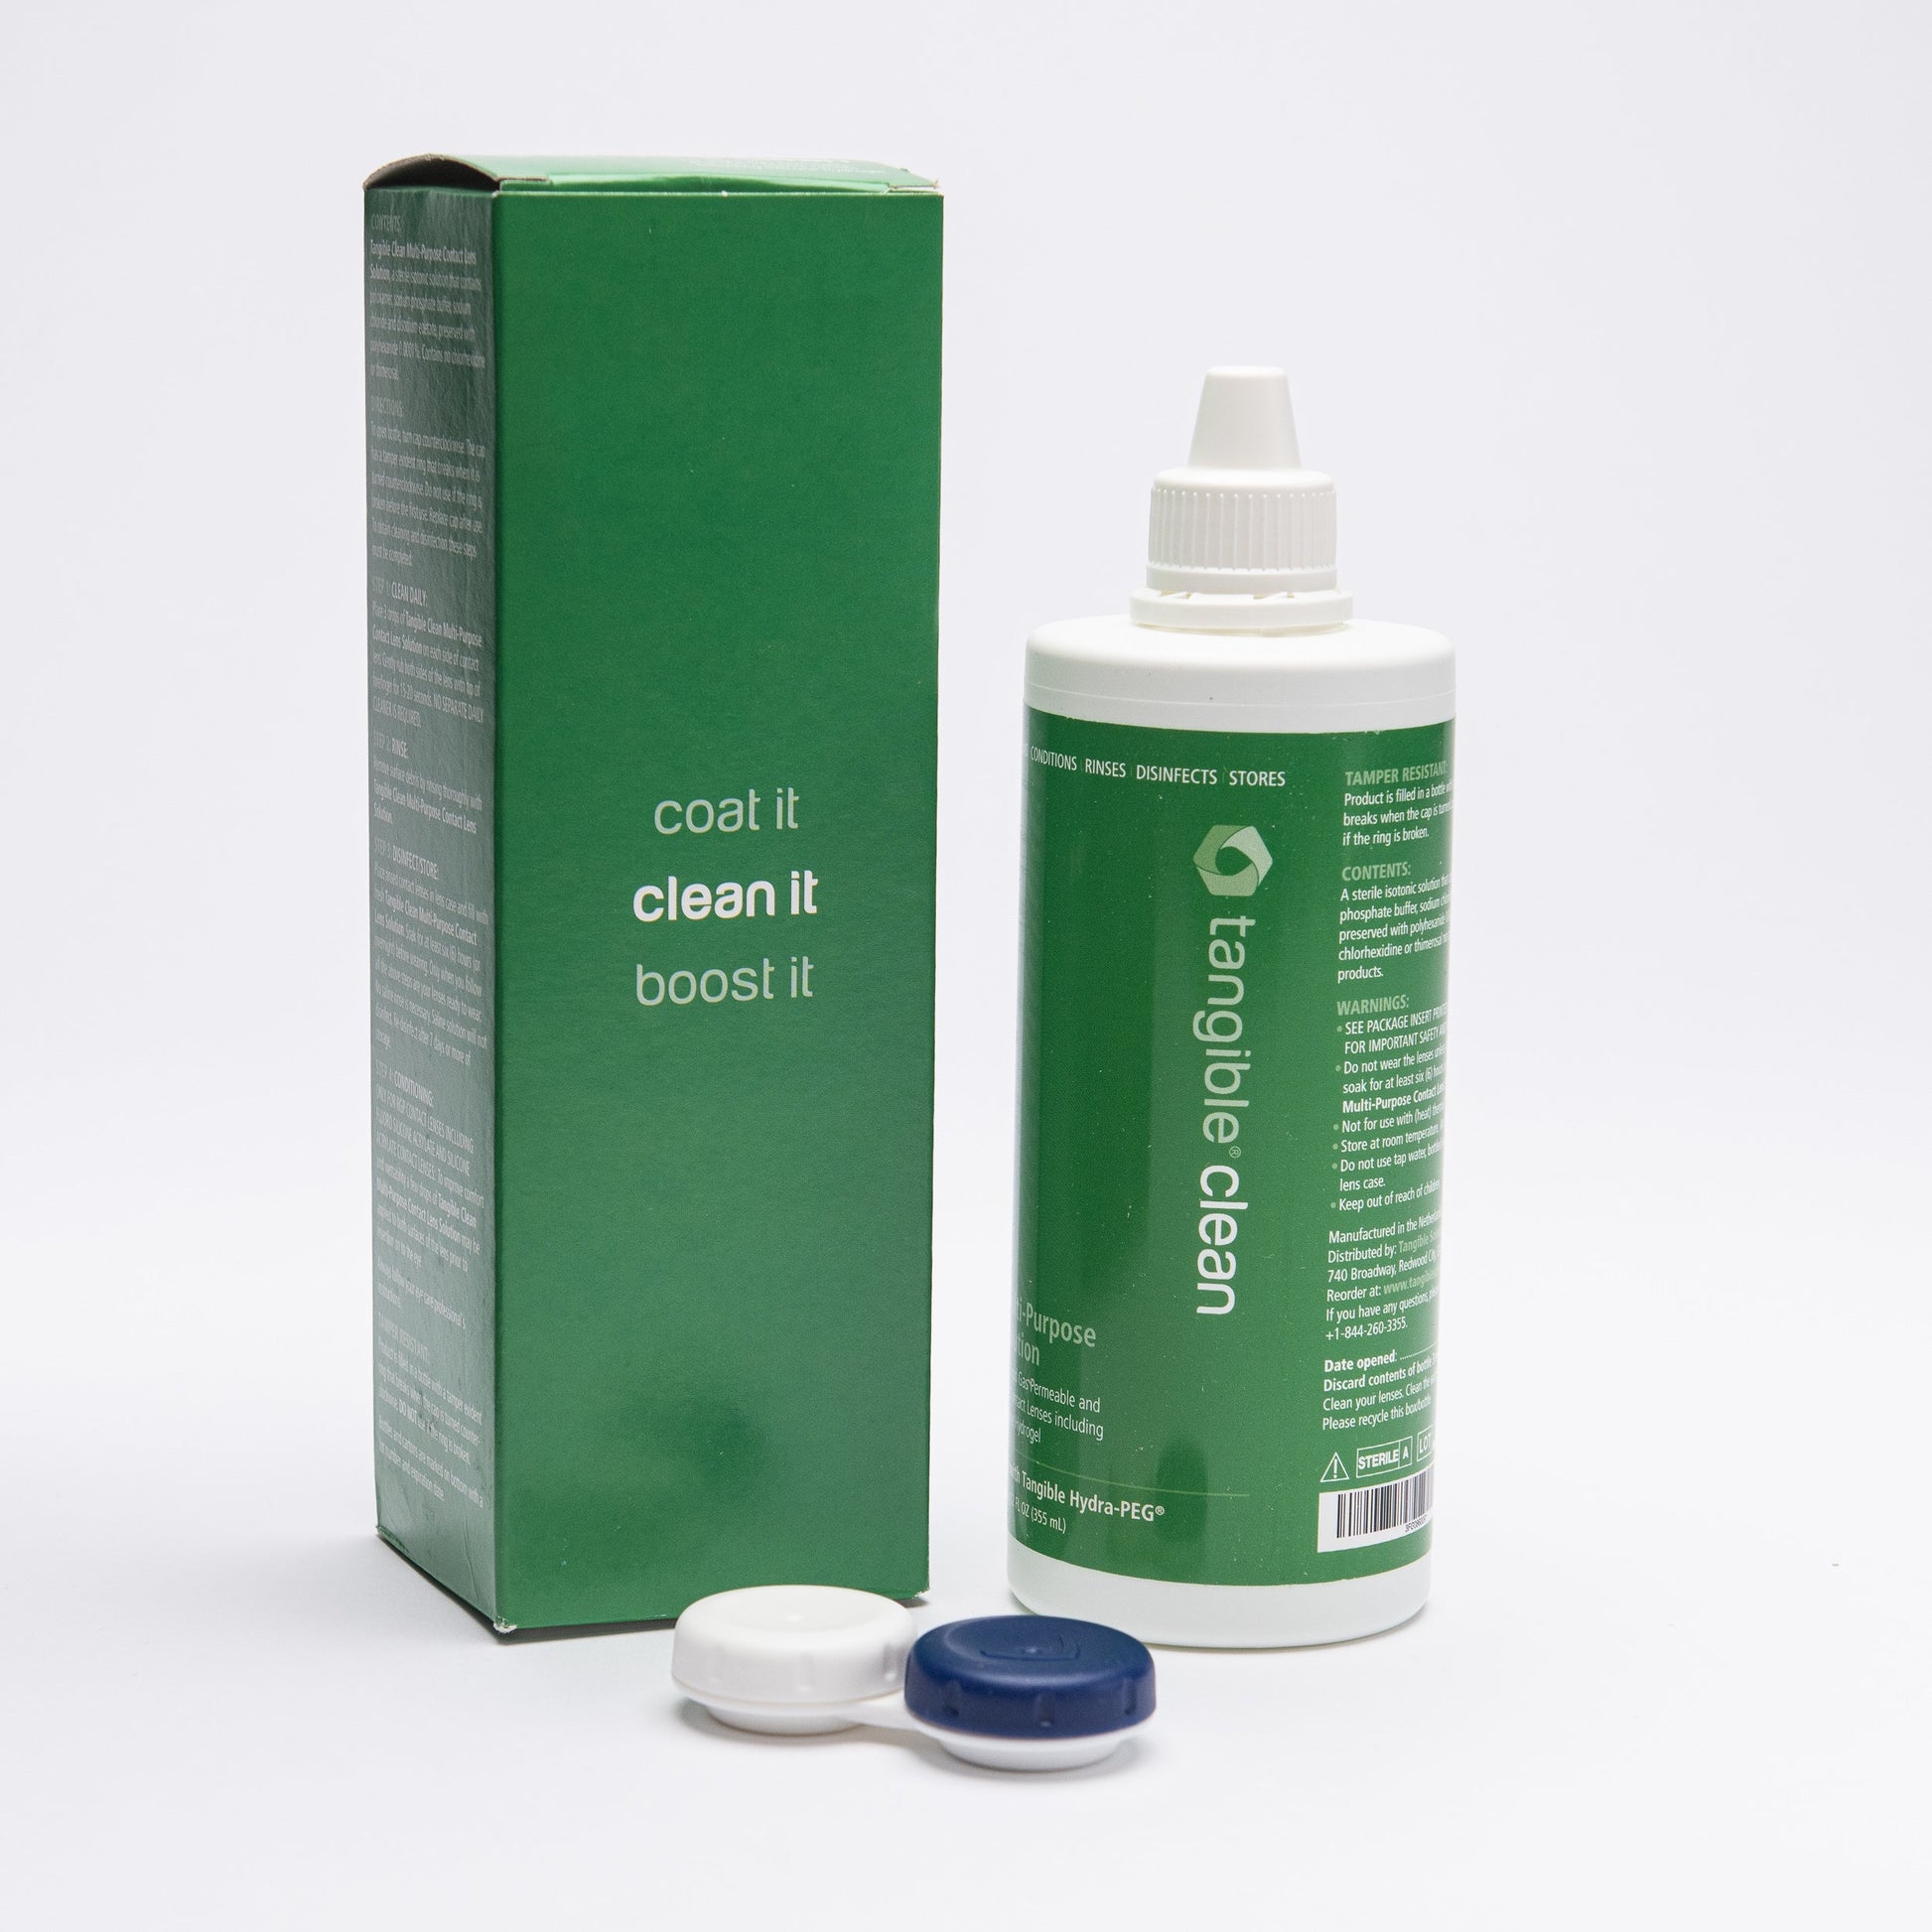 Tangible Clean solution bottle, box, and contact lens case